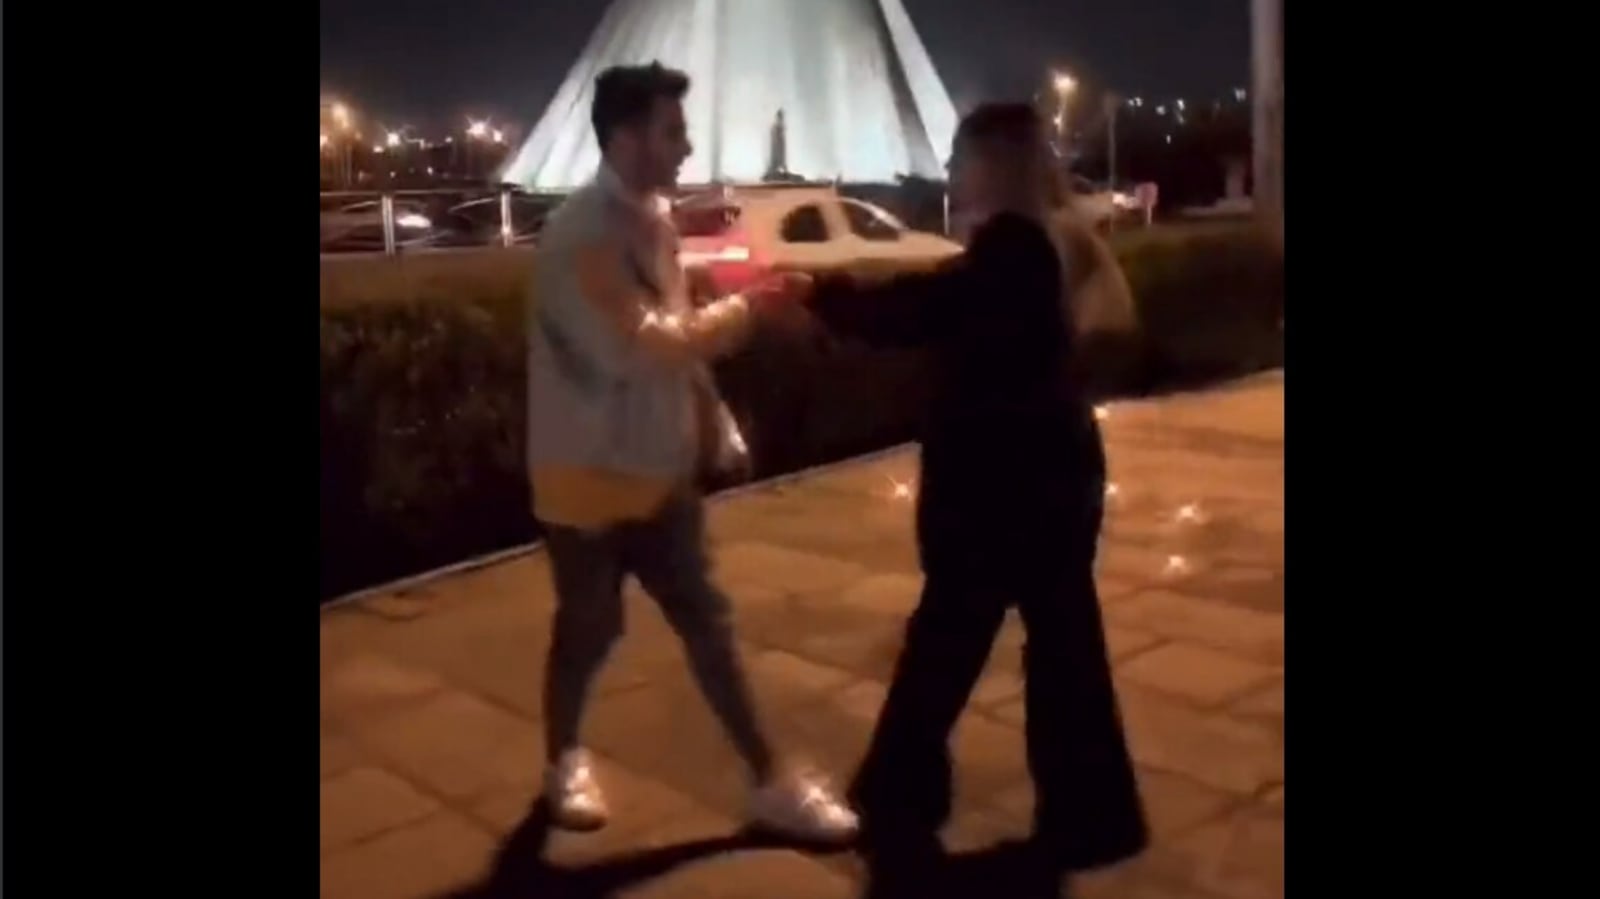 In Iran, couple jailed for more than 10 years over viral dancing video: Report